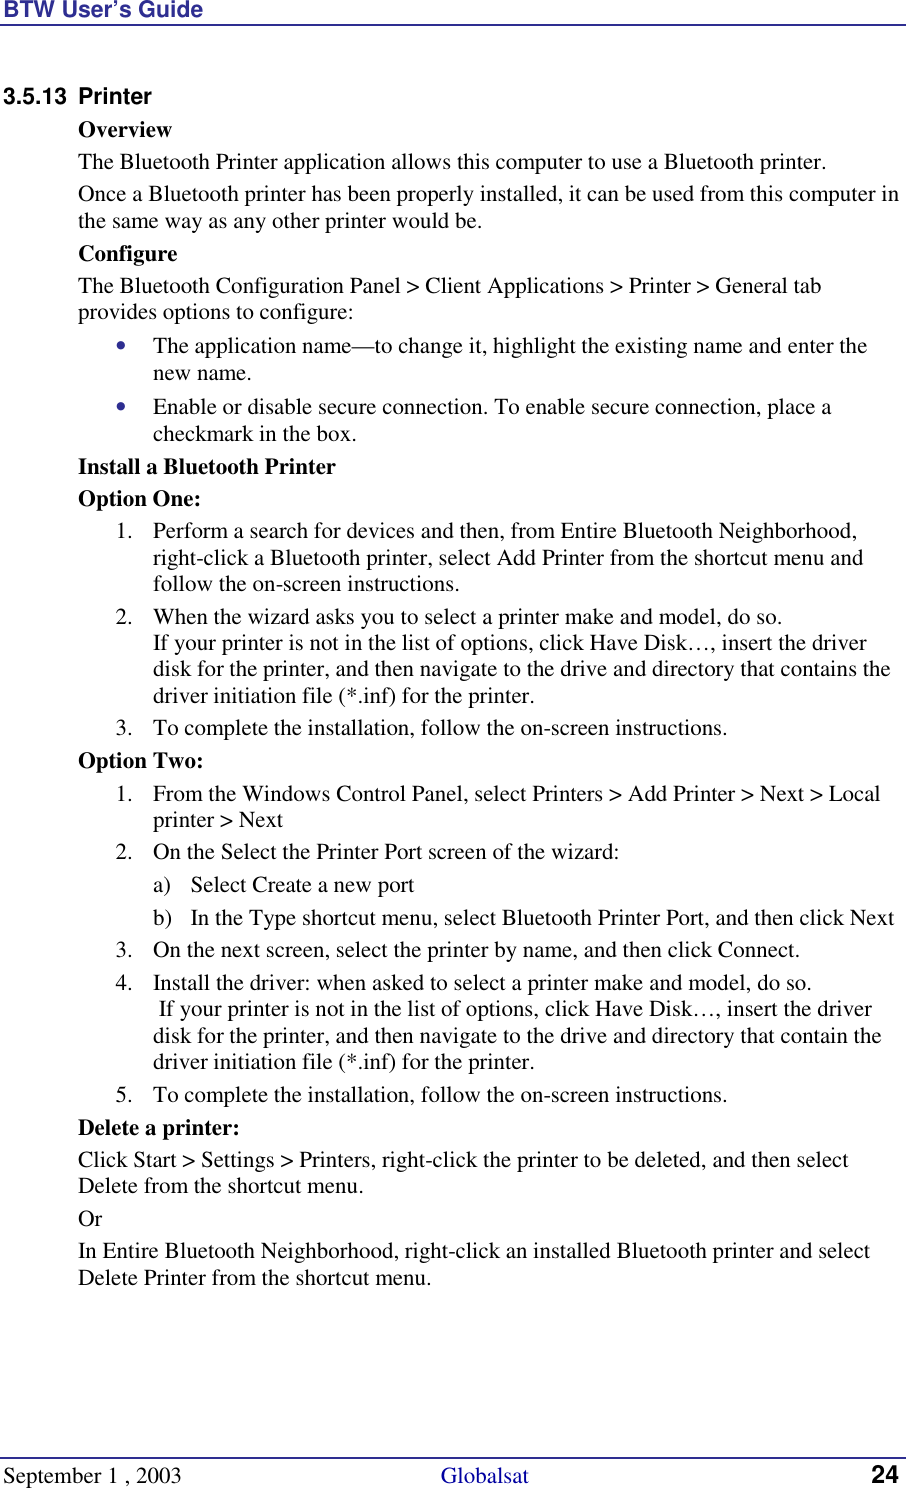 BTW User’s Guide September 1 , 2003                                             Globalsat 24 3.5.13 Printer Overview The Bluetooth Printer application allows this computer to use a Bluetooth printer. Once a Bluetooth printer has been properly installed, it can be used from this computer in the same way as any other printer would be. Configure The Bluetooth Configuration Panel &gt; Client Applications &gt; Printer &gt; General tab provides options to configure: •  The application name—to change it, highlight the existing name and enter the new name. •  Enable or disable secure connection. To enable secure connection, place a checkmark in the box. Install a Bluetooth Printer Option One: 1.  Perform a search for devices and then, from Entire Bluetooth Neighborhood, right-click a Bluetooth printer, select Add Printer from the shortcut menu and follow the on-screen instructions.  2.  When the wizard asks you to select a printer make and model, do so.  If your printer is not in the list of options, click Have Disk…, insert the driver disk for the printer, and then navigate to the drive and directory that contains the driver initiation file (*.inf) for the printer. 3.  To complete the installation, follow the on-screen instructions. Option Two: 1.  From the Windows Control Panel, select Printers &gt; Add Printer &gt; Next &gt; Local printer &gt; Next 2.  On the Select the Printer Port screen of the wizard: a)  Select Create a new port b)  In the Type shortcut menu, select Bluetooth Printer Port, and then click Next 3.  On the next screen, select the printer by name, and then click Connect.  4.  Install the driver: when asked to select a printer make and model, do so.  If your printer is not in the list of options, click Have Disk…, insert the driver disk for the printer, and then navigate to the drive and directory that contain the driver initiation file (*.inf) for the printer. 5.  To complete the installation, follow the on-screen instructions. Delete a printer: Click Start &gt; Settings &gt; Printers, right-click the printer to be deleted, and then select Delete from the shortcut menu. Or In Entire Bluetooth Neighborhood, right-click an installed Bluetooth printer and select Delete Printer from the shortcut menu.  